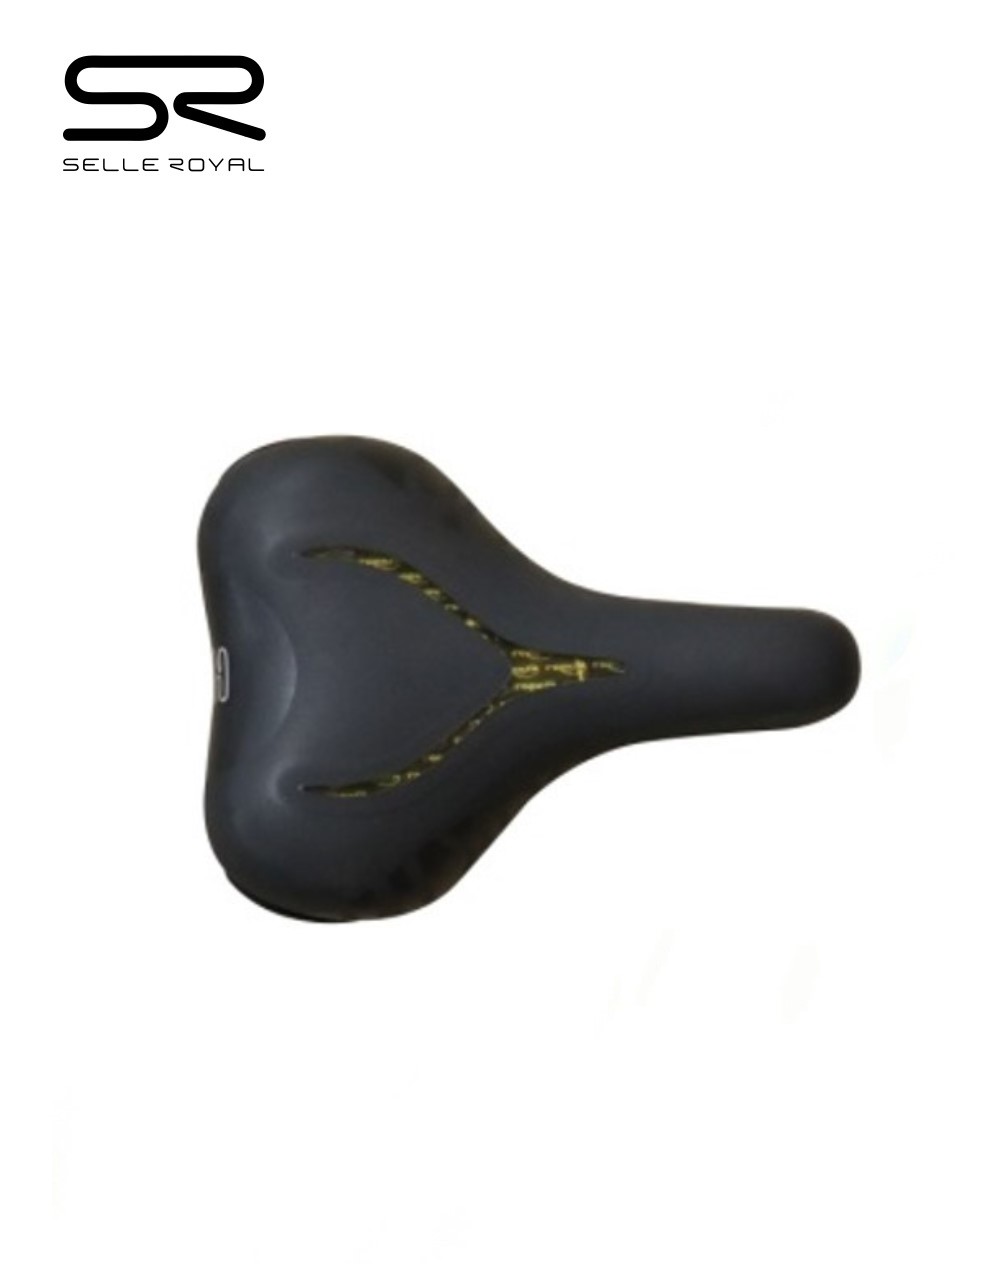 SELLE ROYAL | Buy Accessories Buy | | Saddle Bike Saddle Shop Bicycle in Online Saddles Cycle